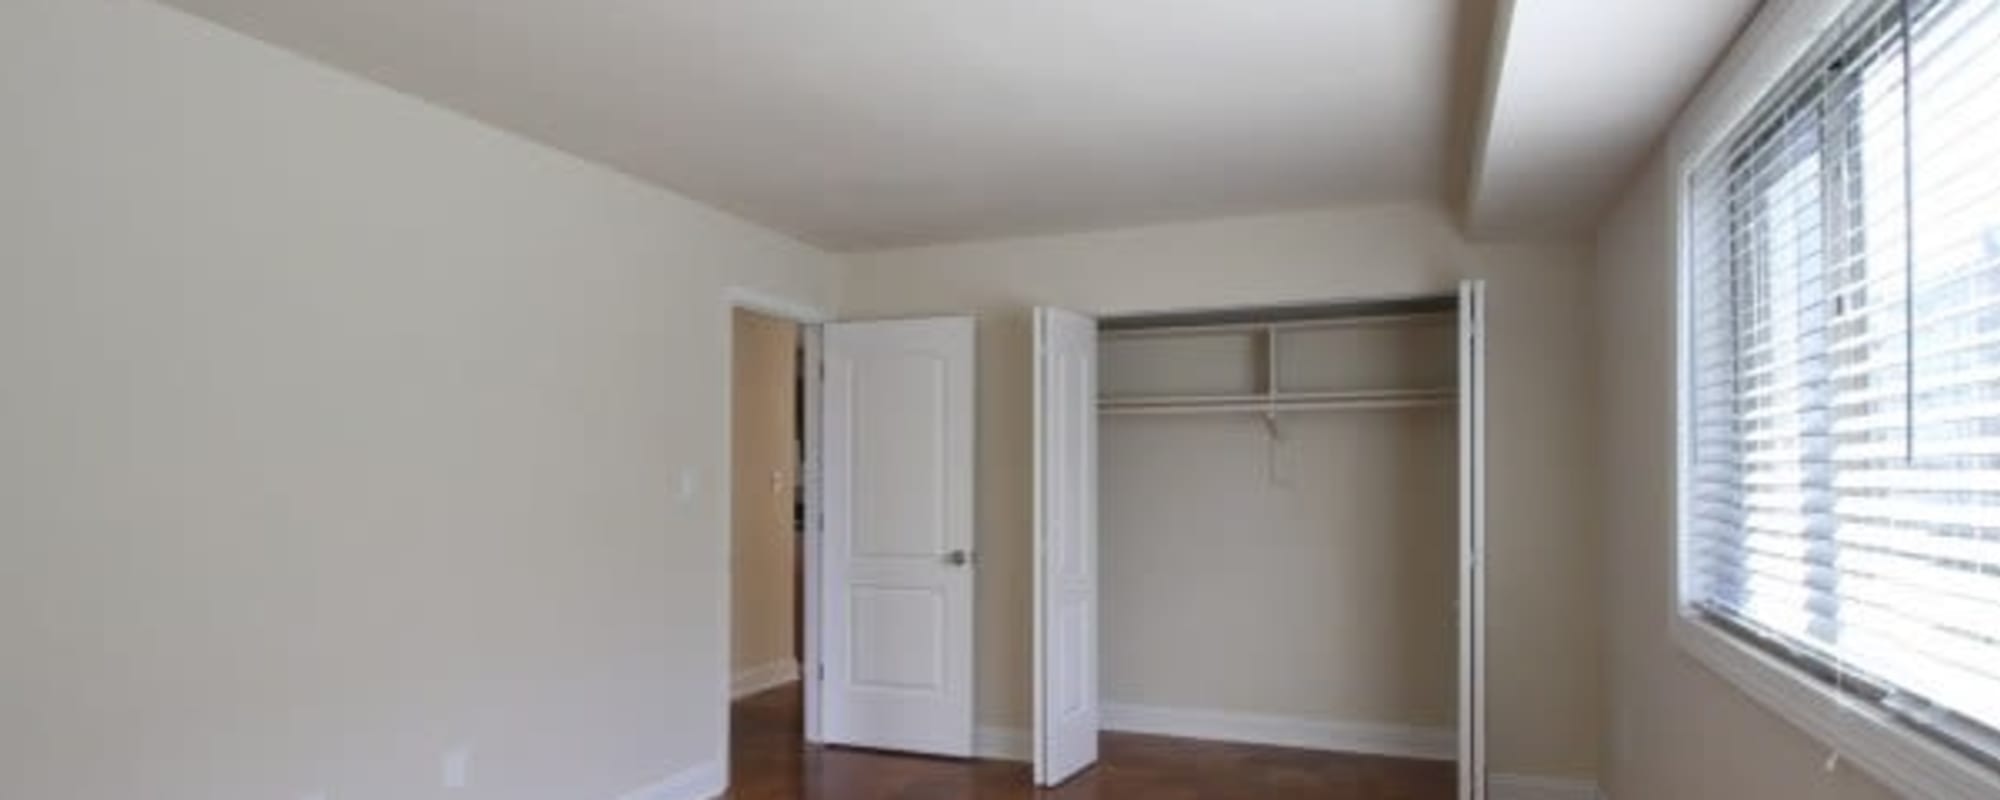 Large closet in a bedroom at Chelsea Park in Gaithersburg, Maryland